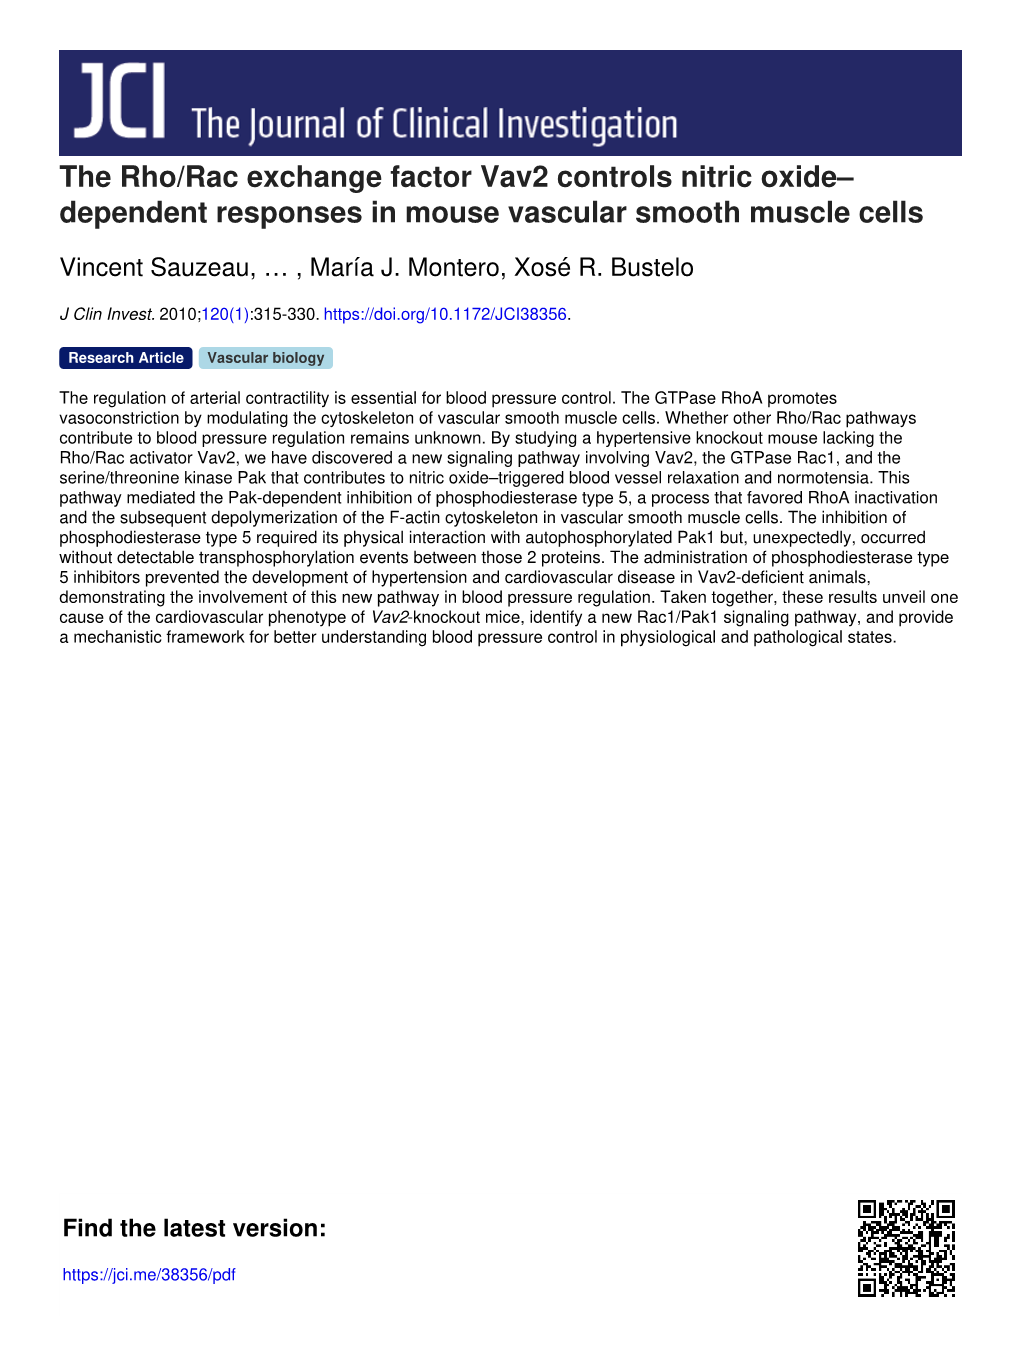 The Rho/Rac Exchange Factor Vav2 Controls Nitric Oxide– Dependent Responses in Mouse Vascular Smooth Muscle Cells